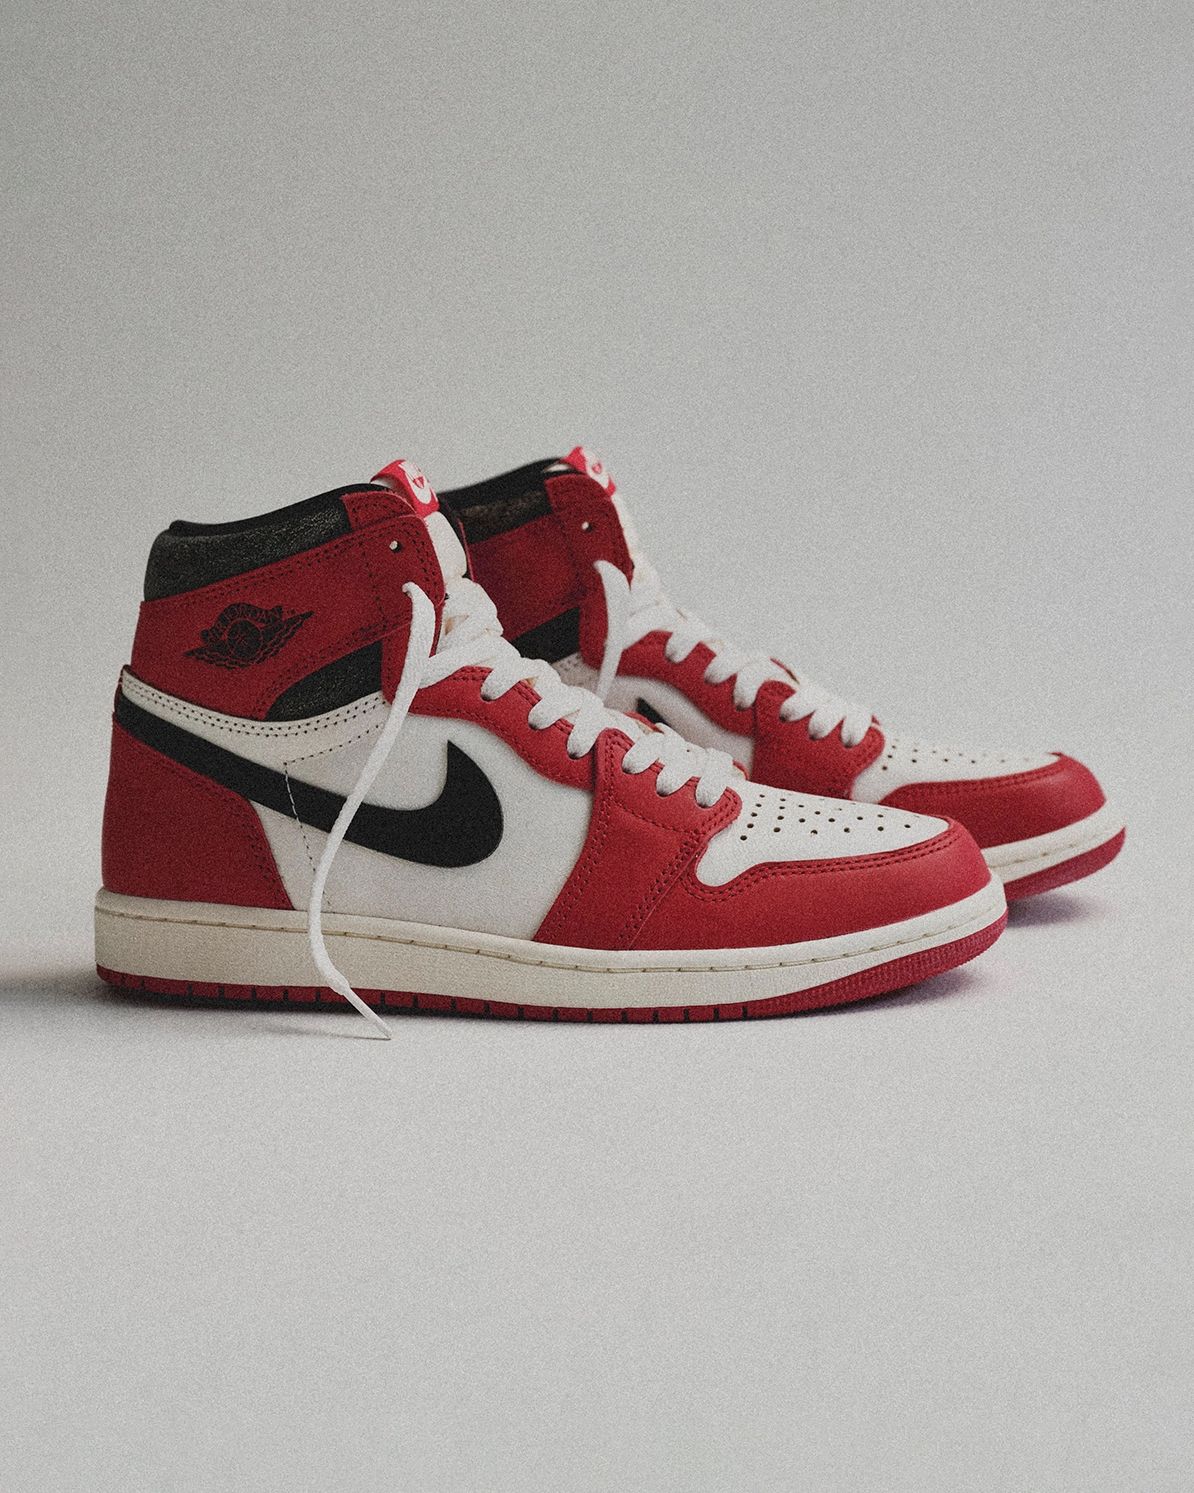 Where to Buy the Air Jordan 1 High OG “Lost and Found” | House of